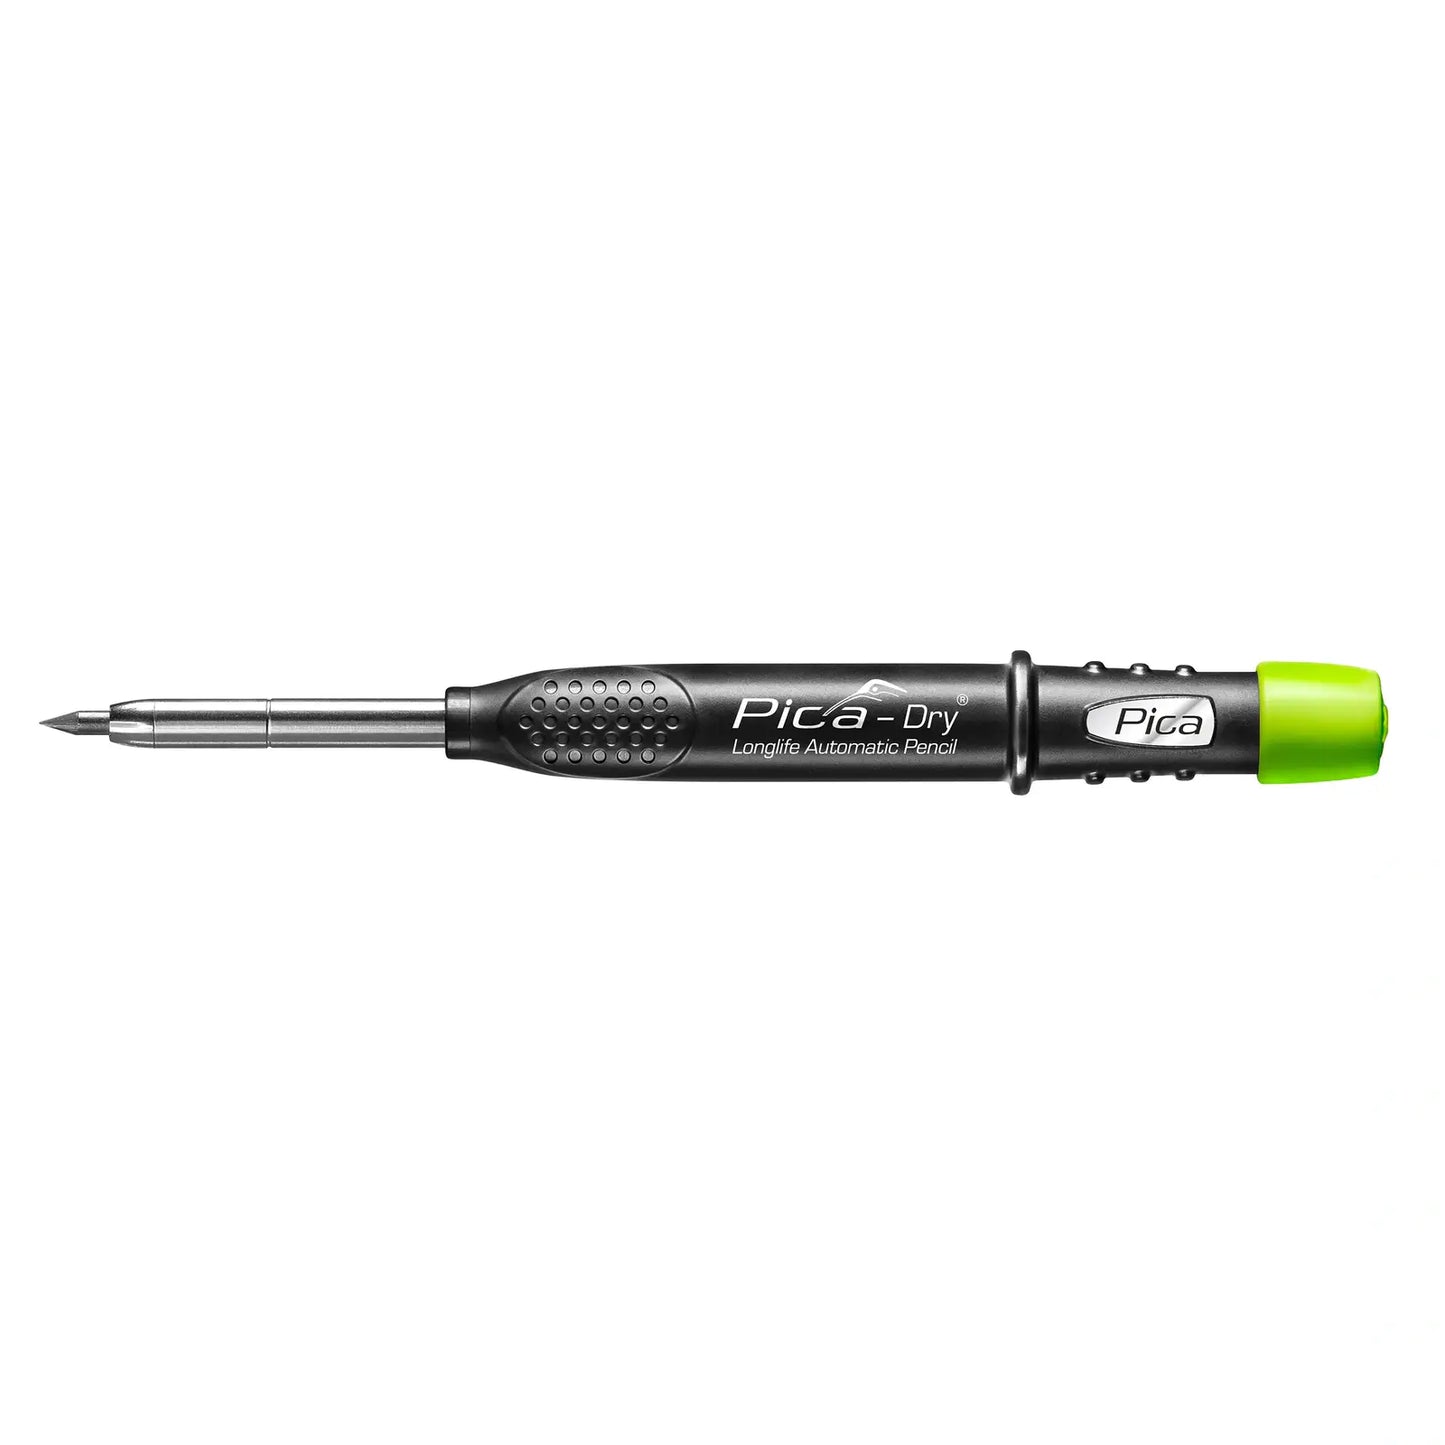 Pica Dry Longlife Automatic Pencil tool-junction-nz